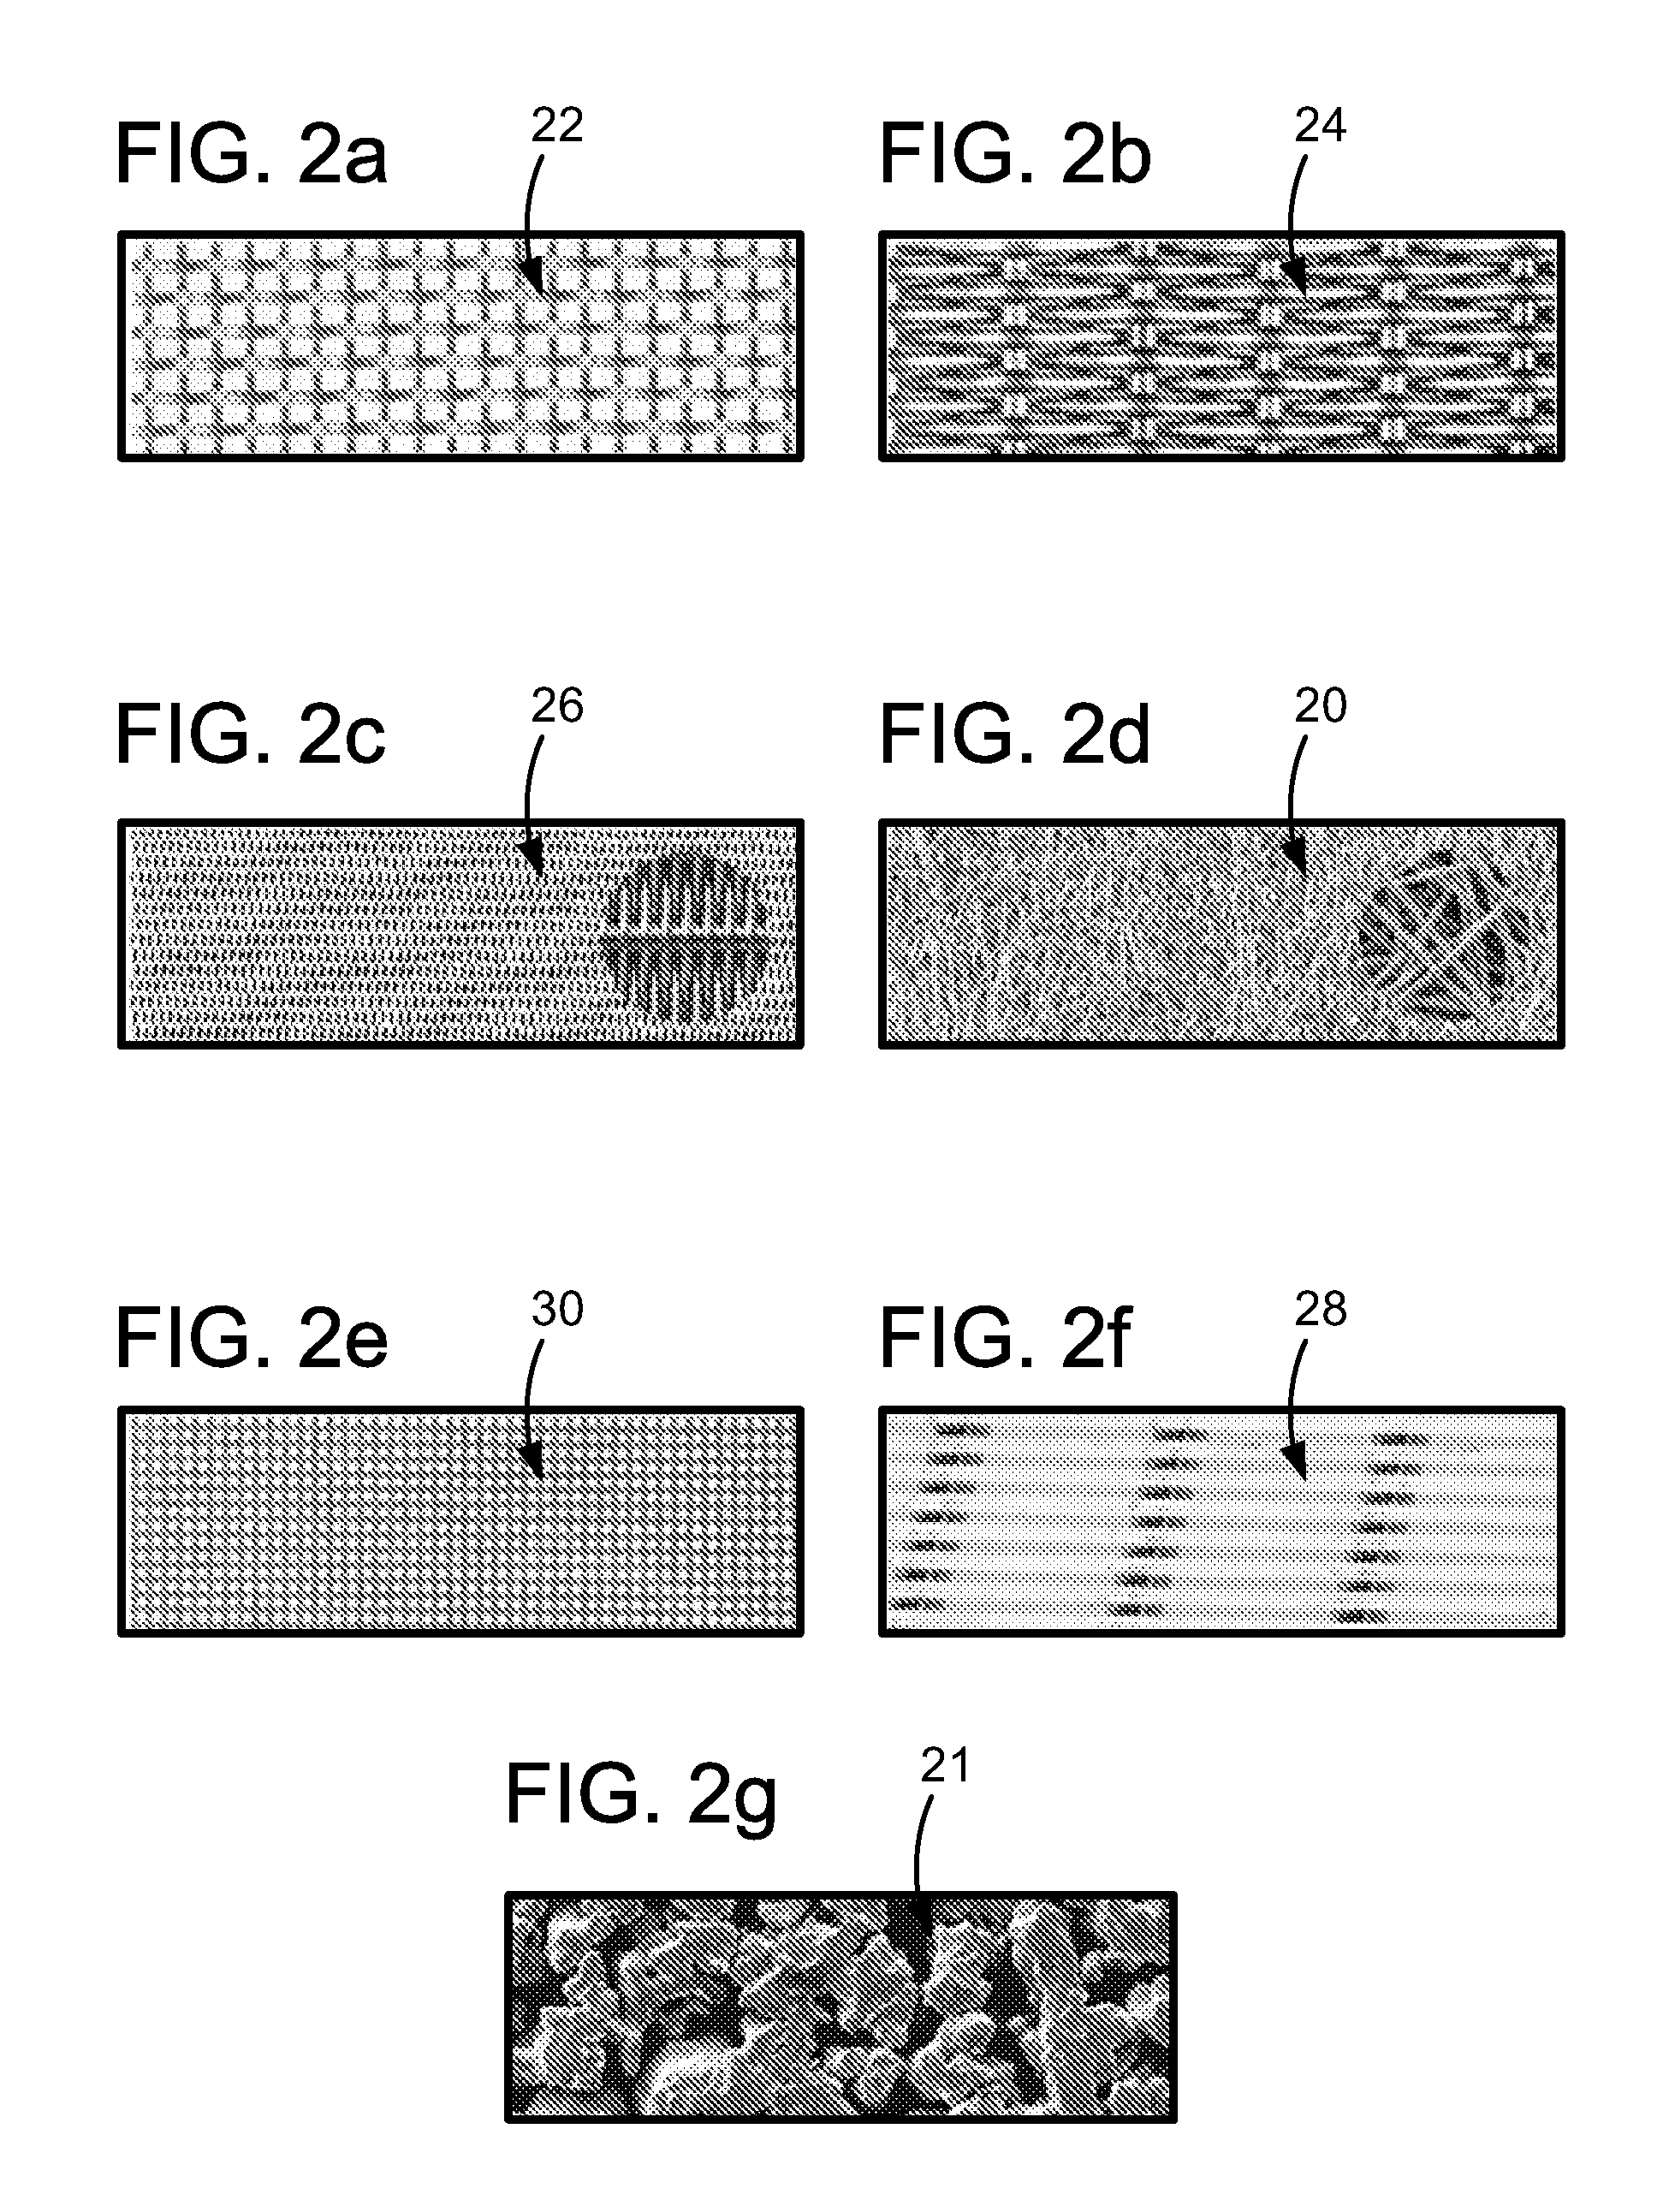 Contaminant adsorption filtration media, elements, systems and methods employing wire or other lattice support